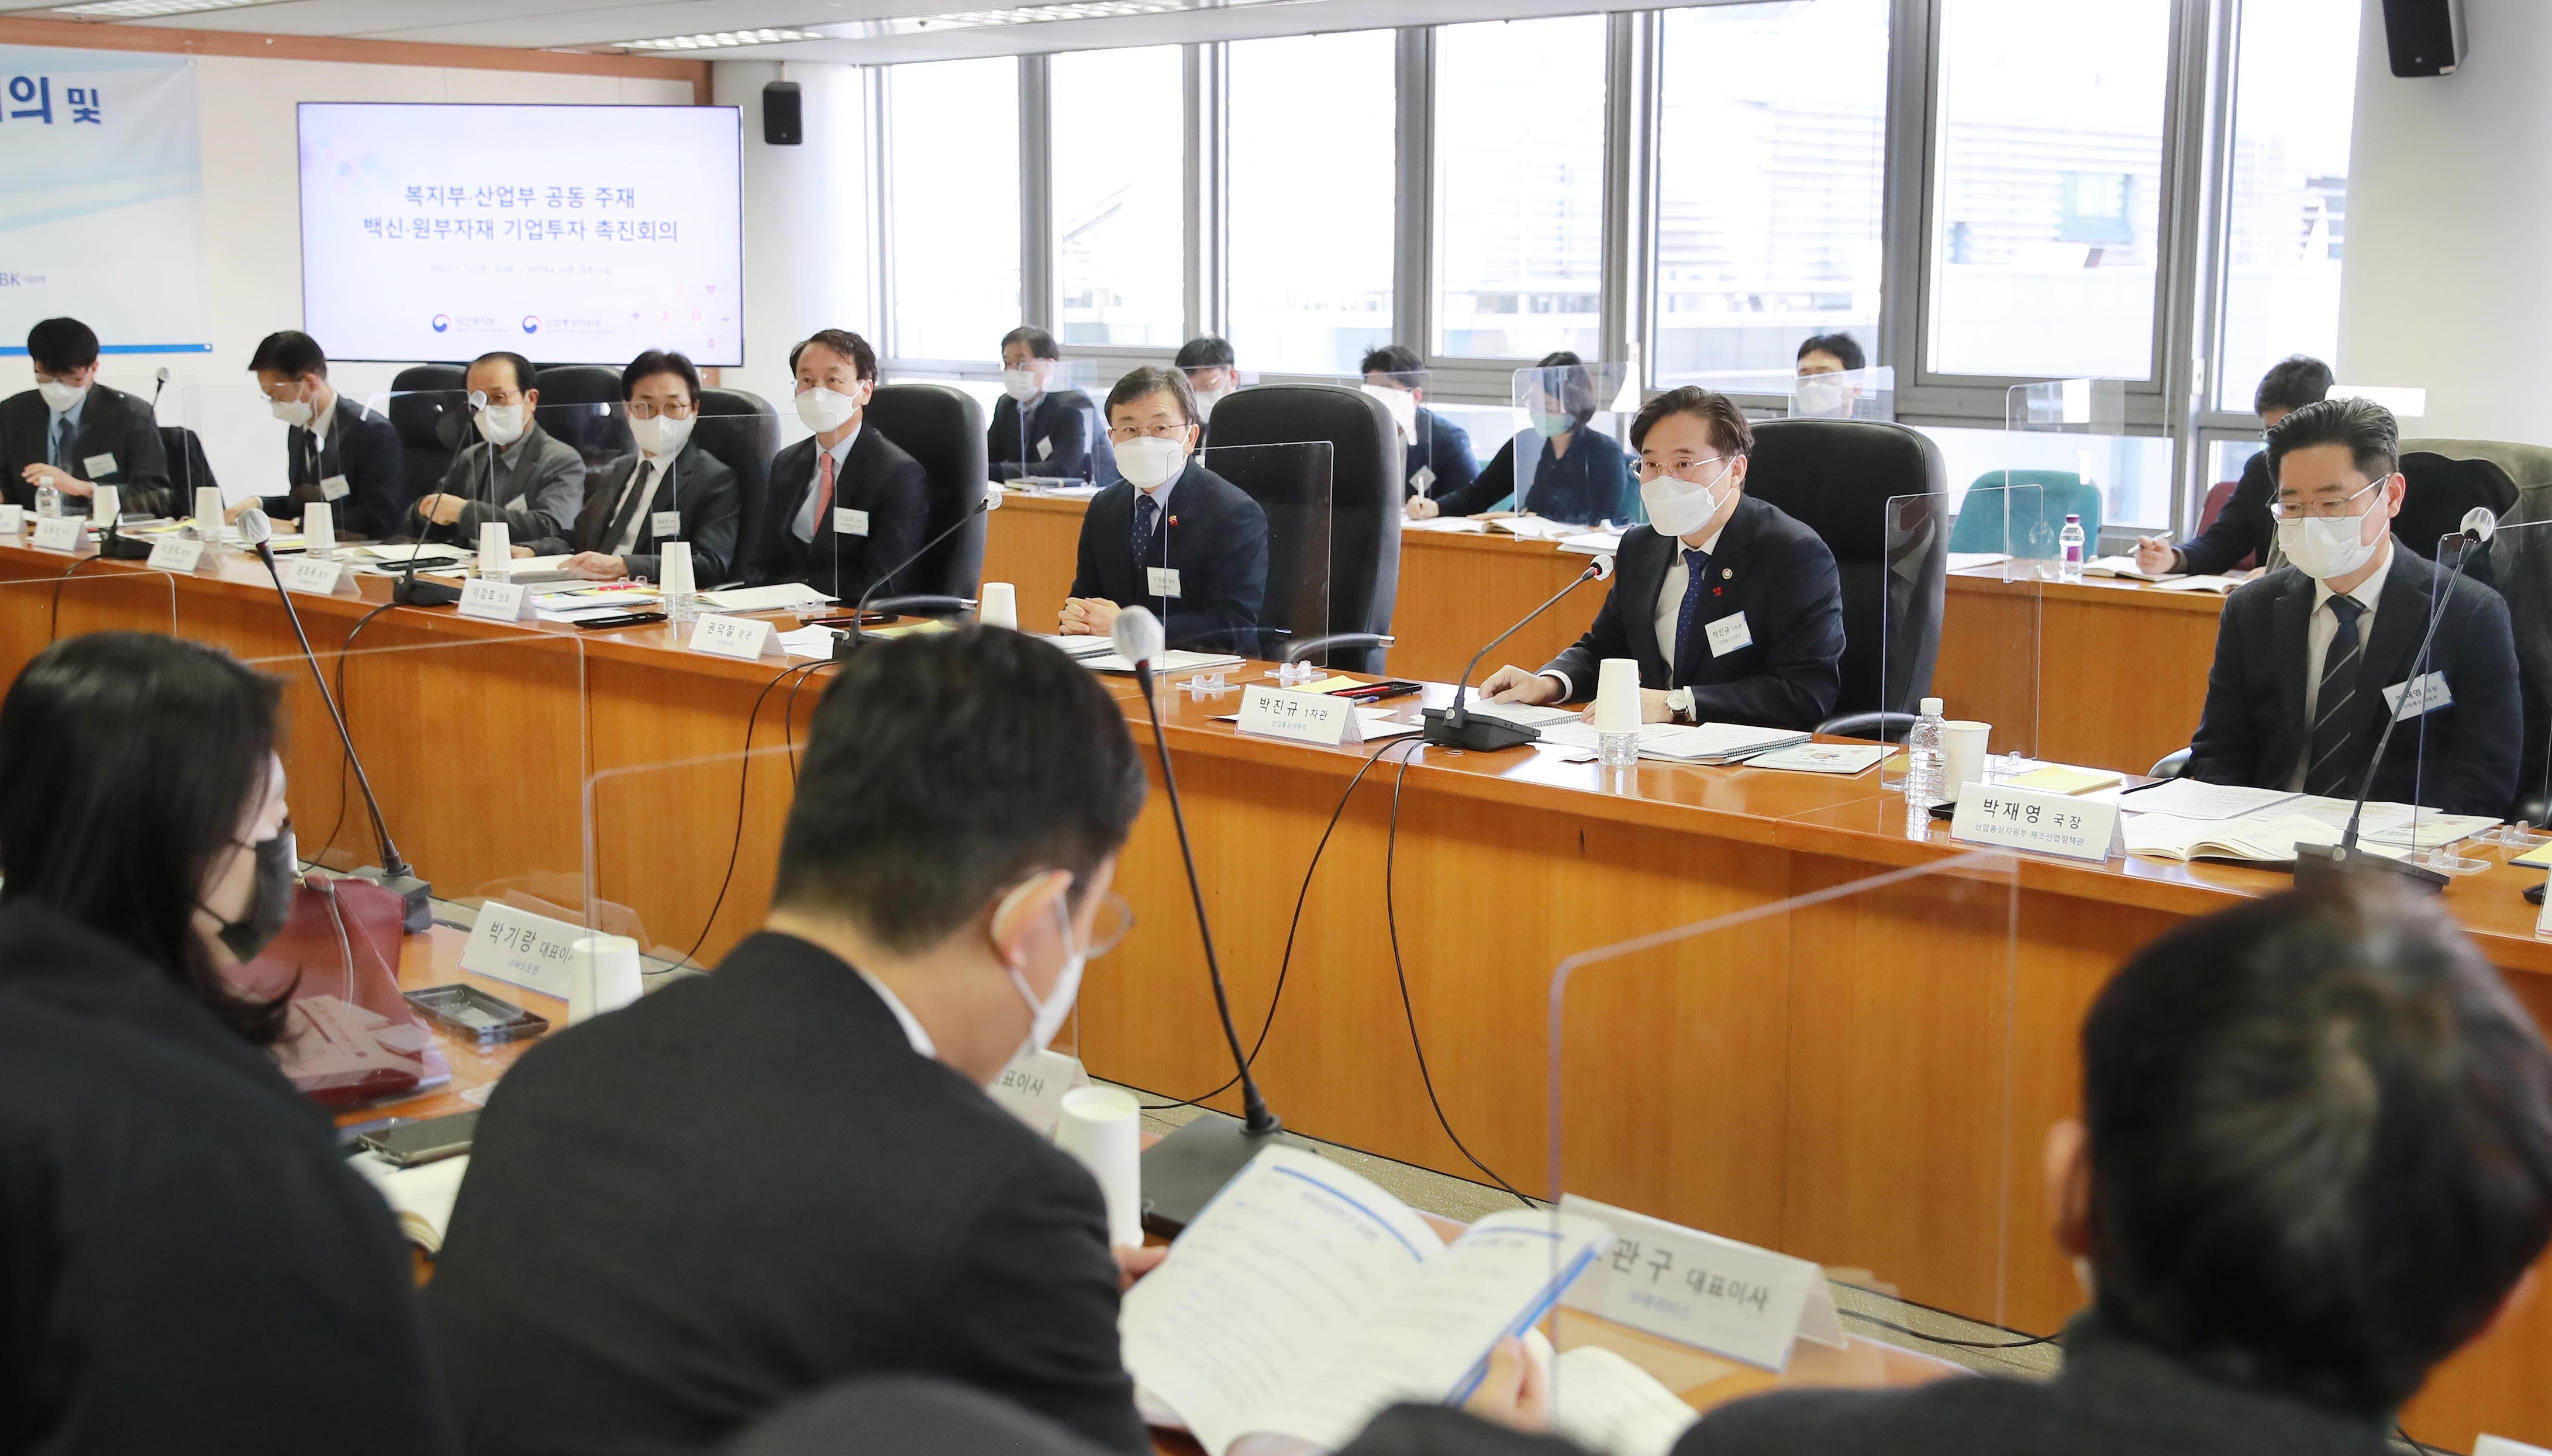 Corporate investment stimulus meeting for raw and subsidiary vaccine production materials Image 0